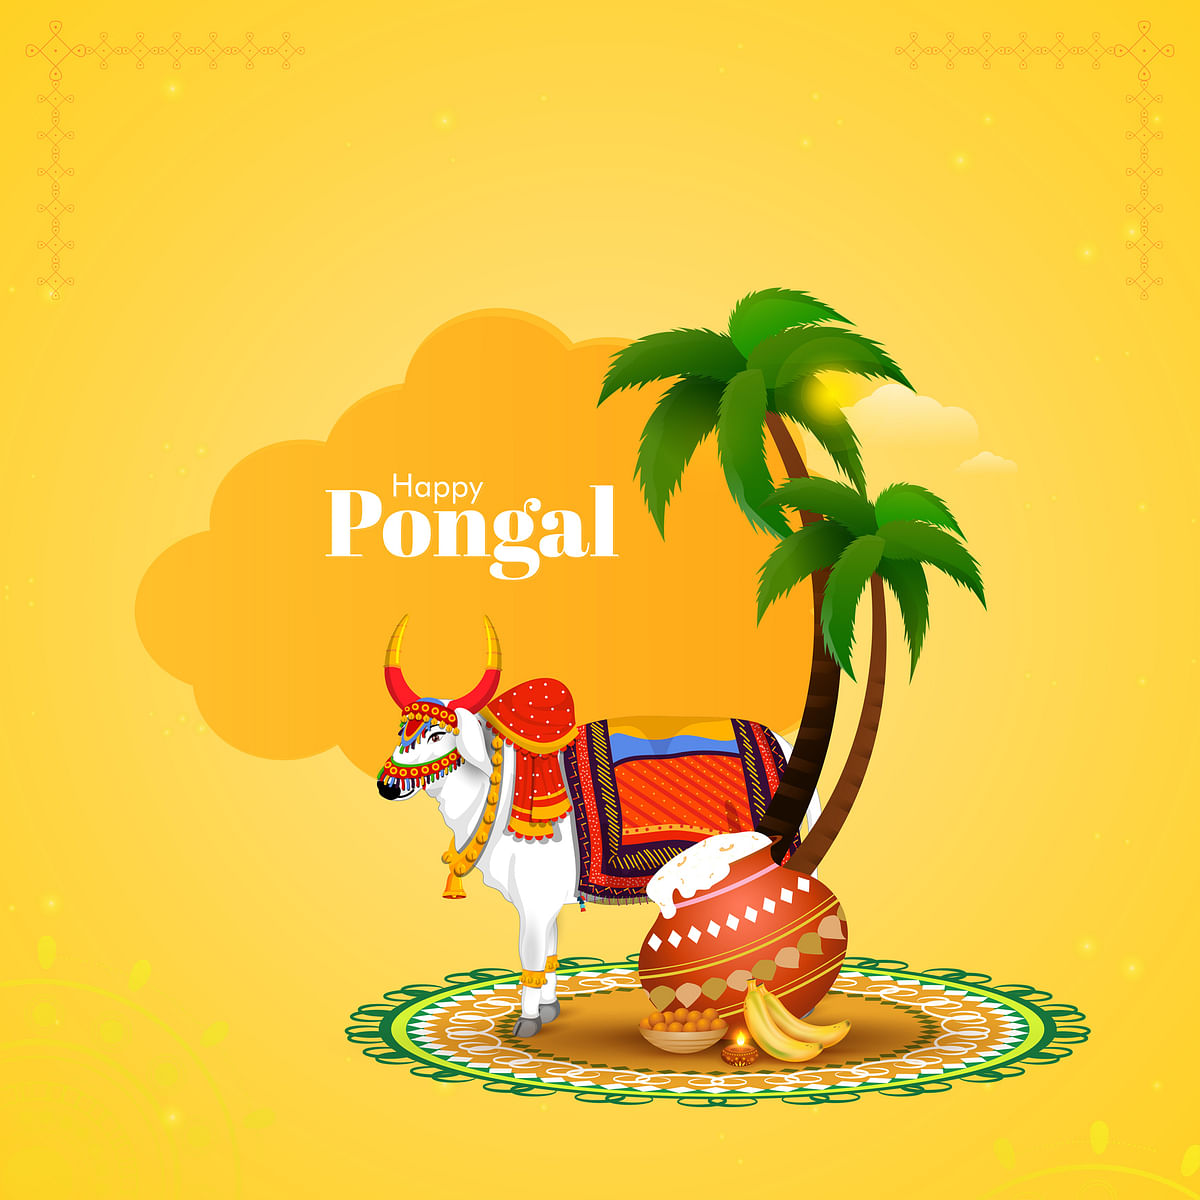 Here are some wishes, images and quotes for your loved ones on the occasion of Pongal 2022.